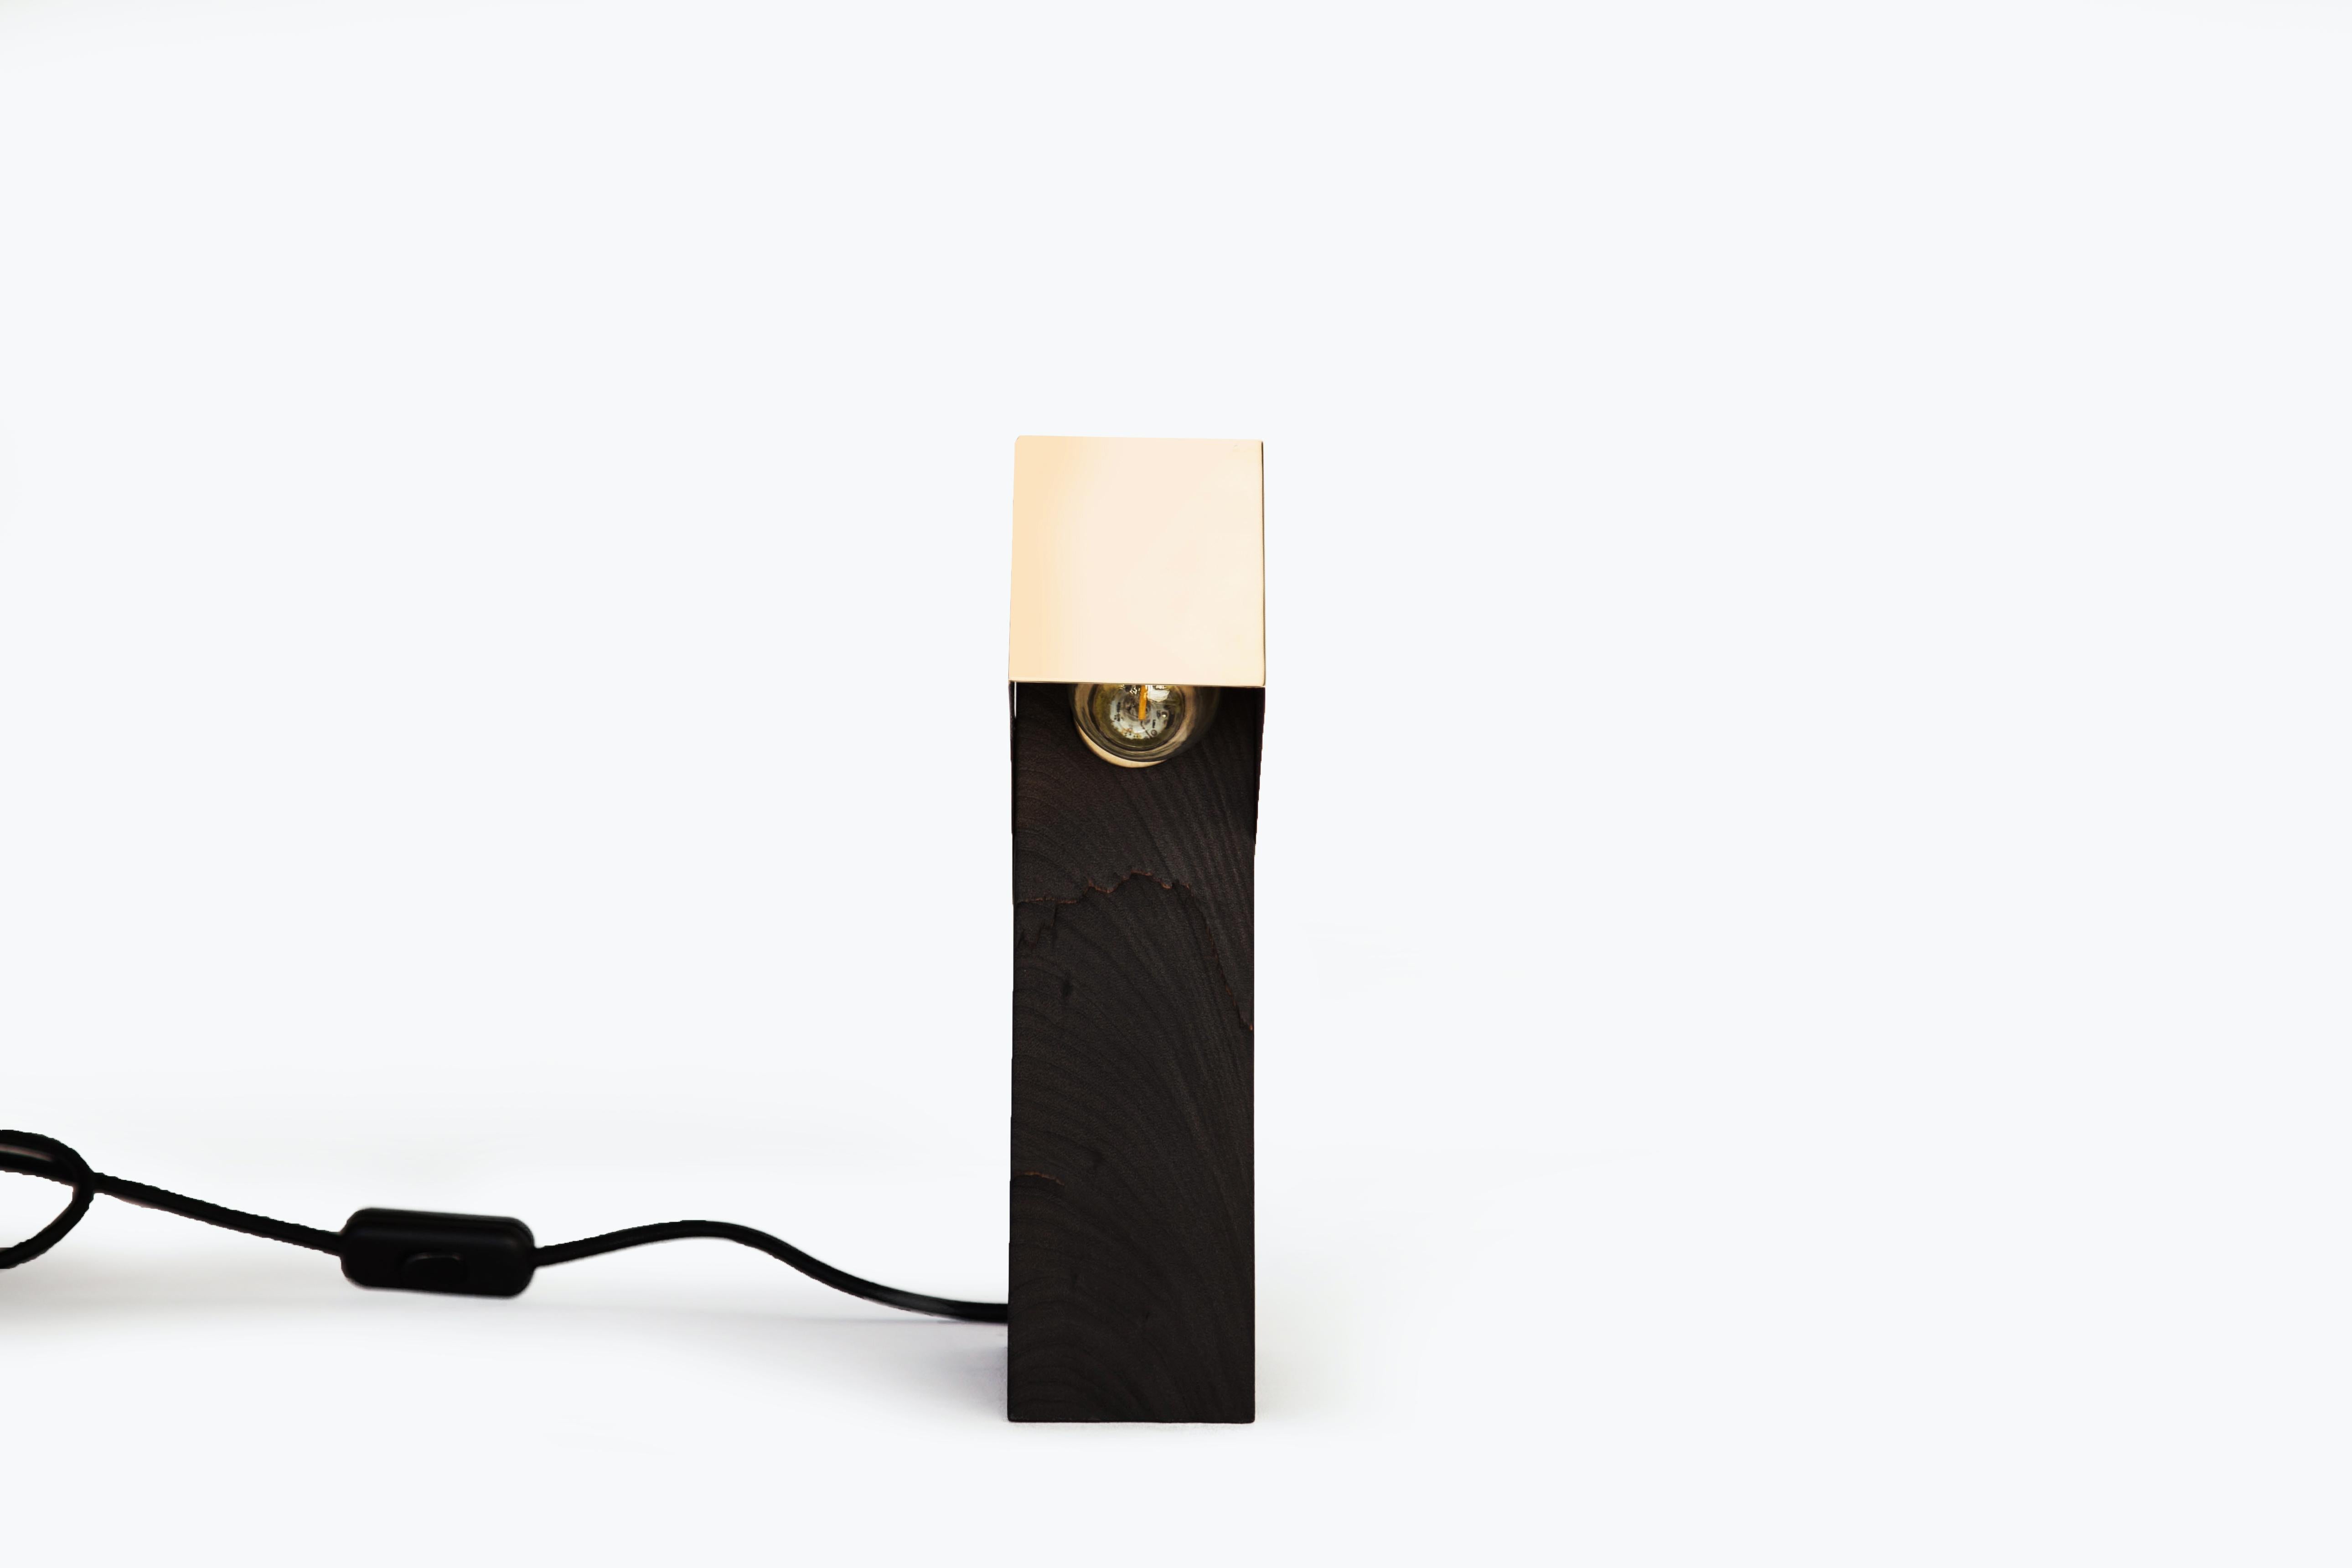 Portuguese Viga - Contemporary Handmade Table Lamp Minimalist Limited by Caio Superchi For Sale